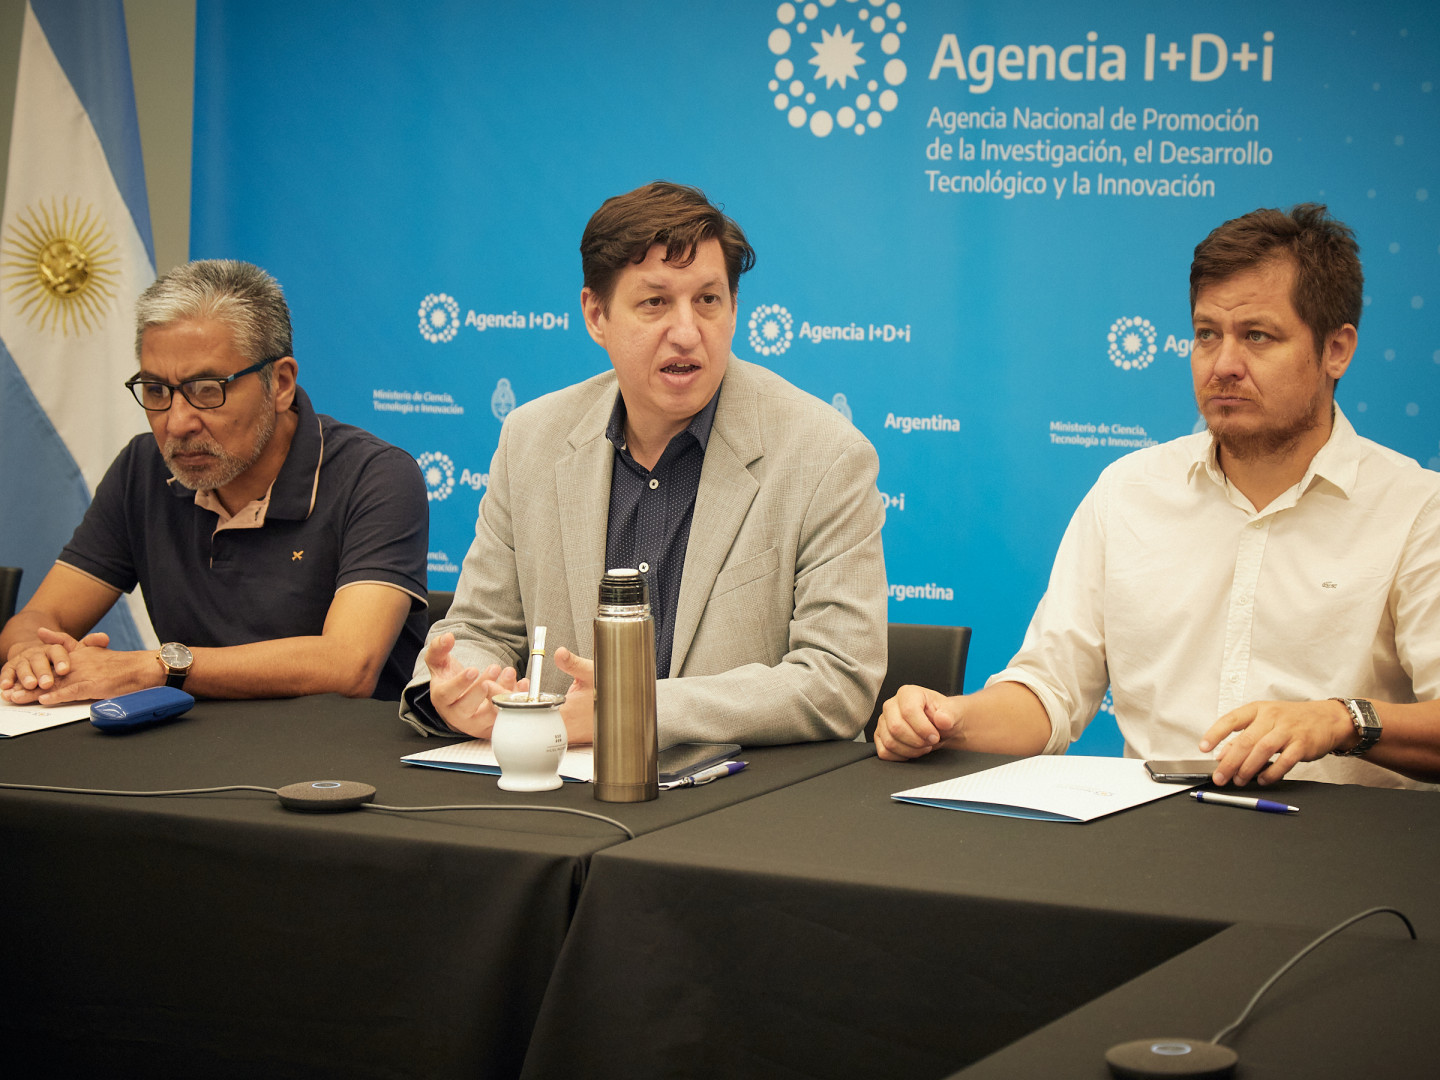 The R+D+i agency has received Ministers of Science and Technology from the provinces of Norte Grande